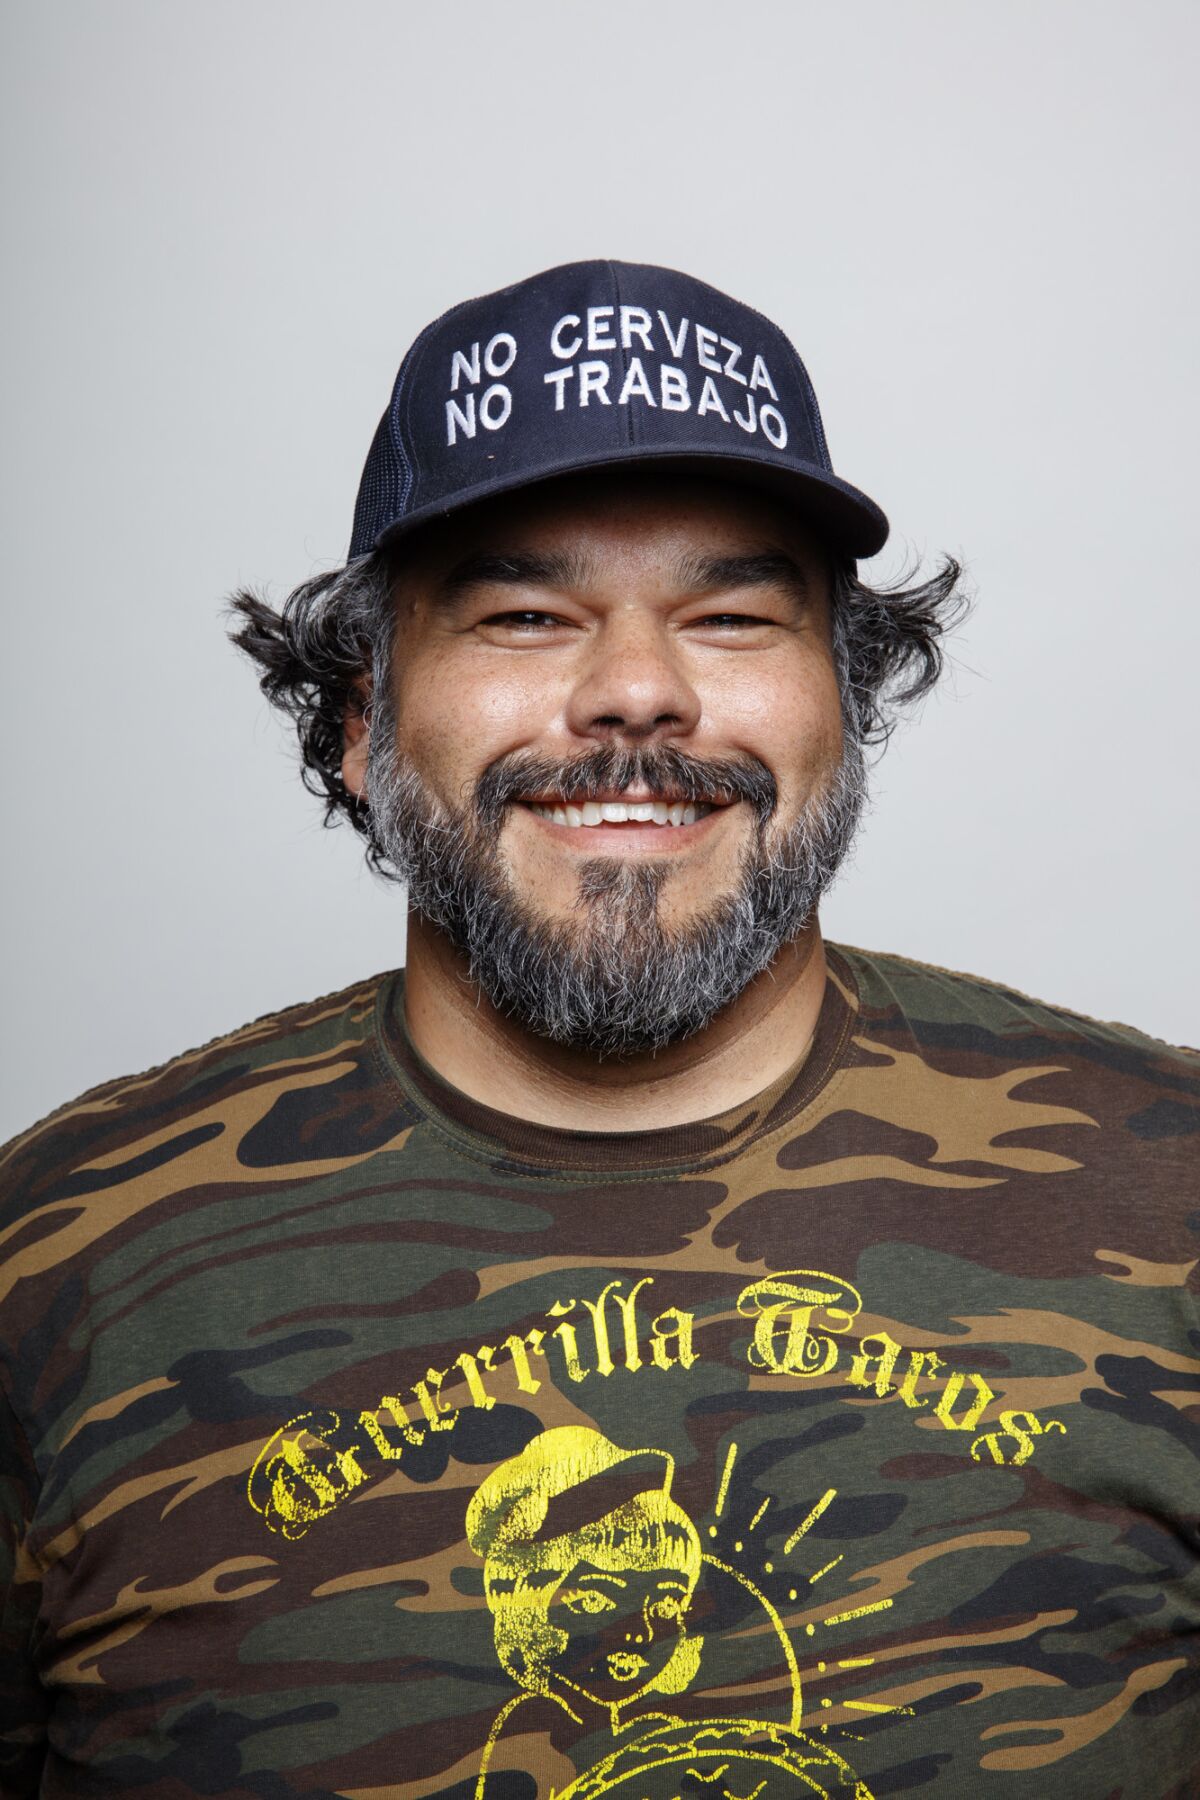 Wes Avila, author of "Guerrilla Tacos: Recipes from the Streets of L.A."